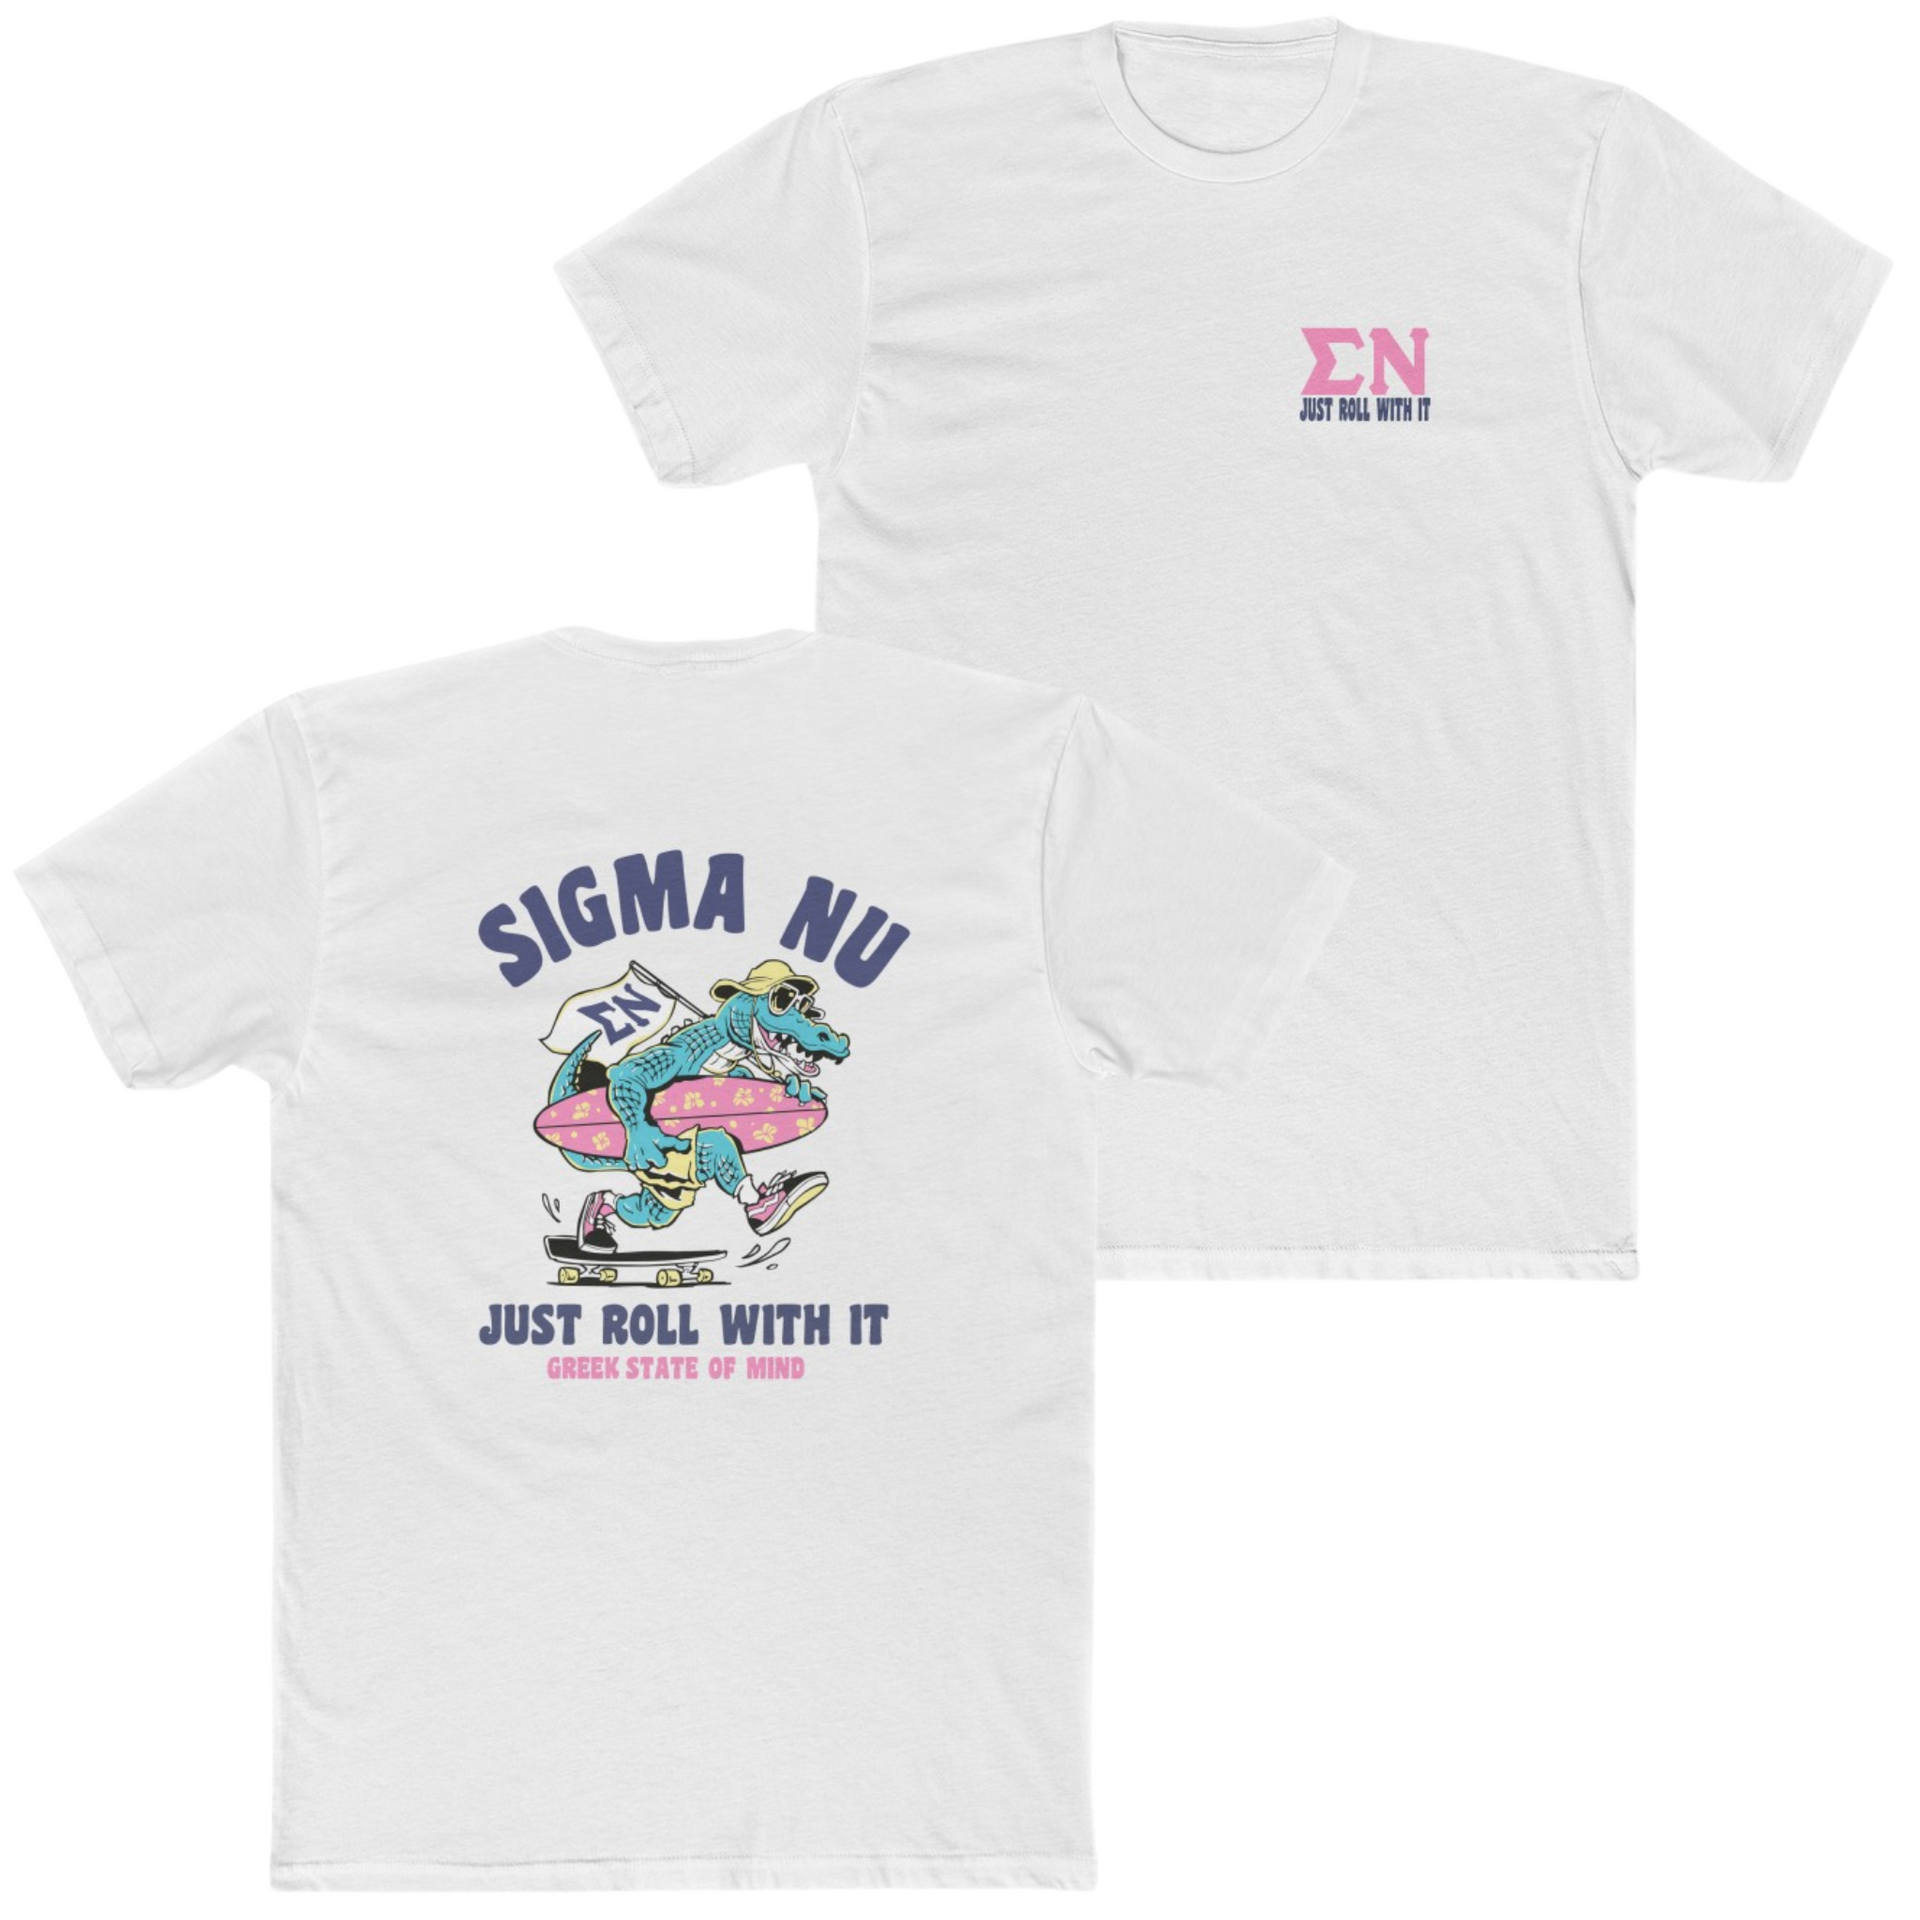 White Sigma Nu Graphic T-Shirt | Alligator Skater | Sigma Nu Clothing, Apparel and Merchandise 